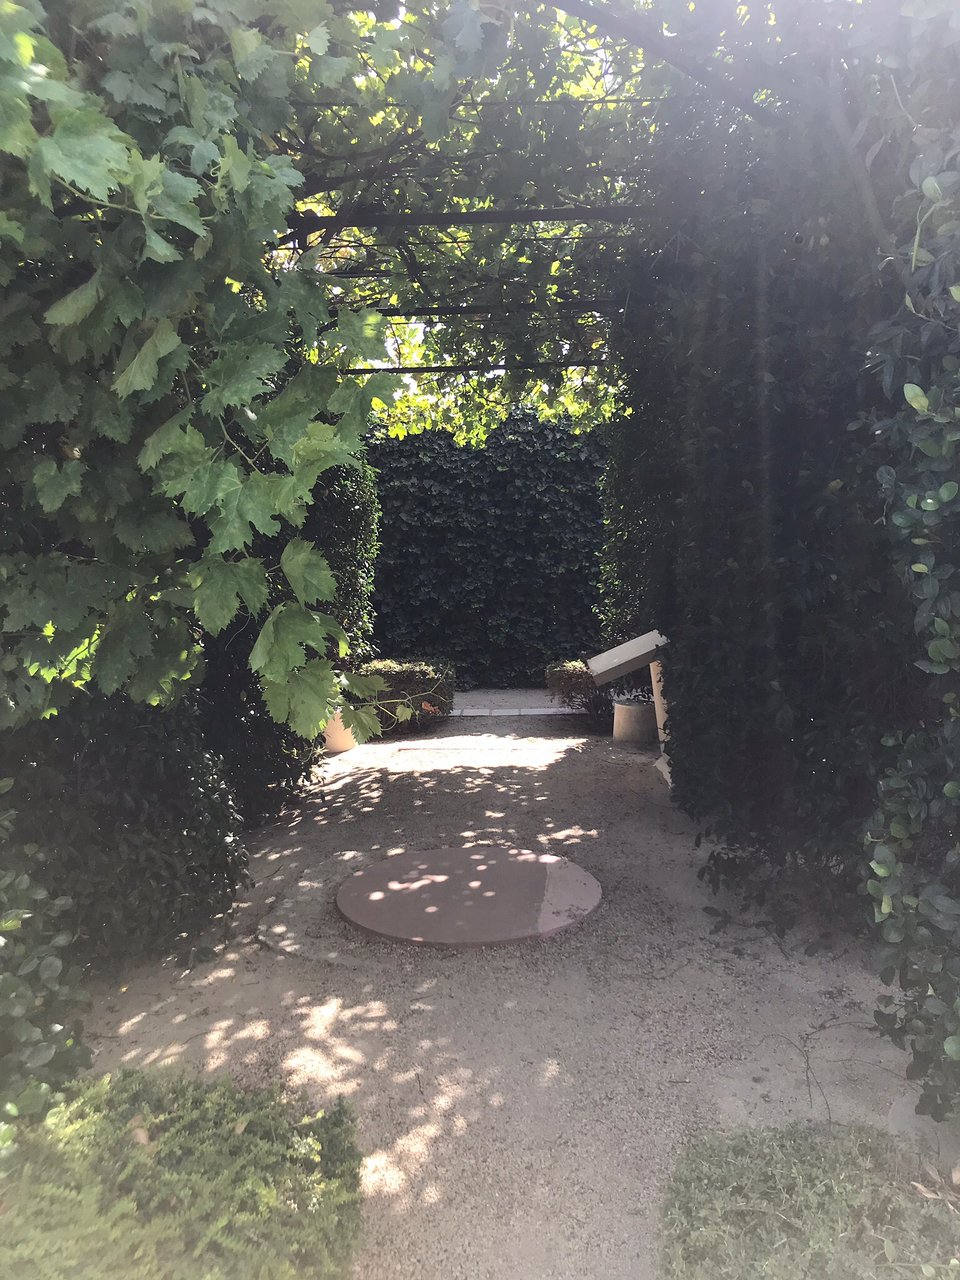 Jardin Des Arts Arles Nouveau Jardin Hortus Arles 2020 All You Need to Know before You